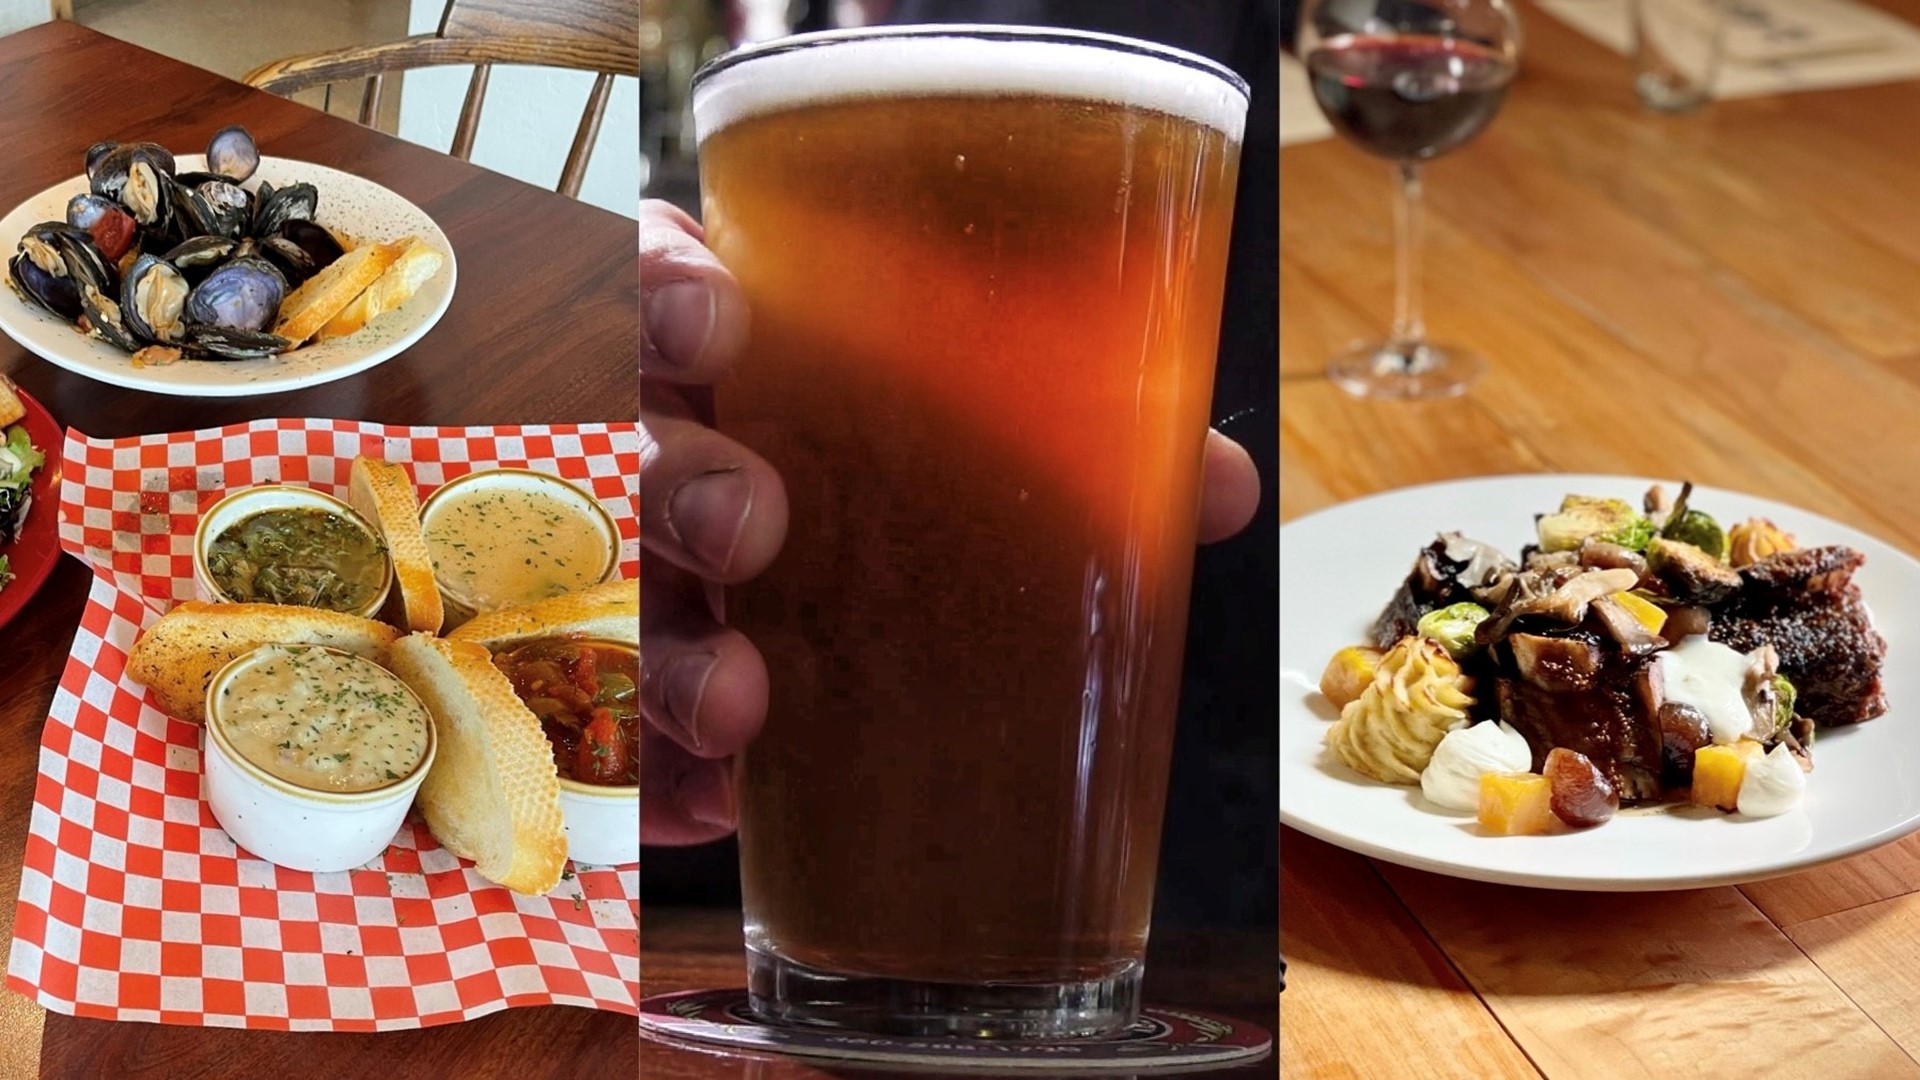 This town has everything a foodie could want. Sponsored by Anacortes Tourism.